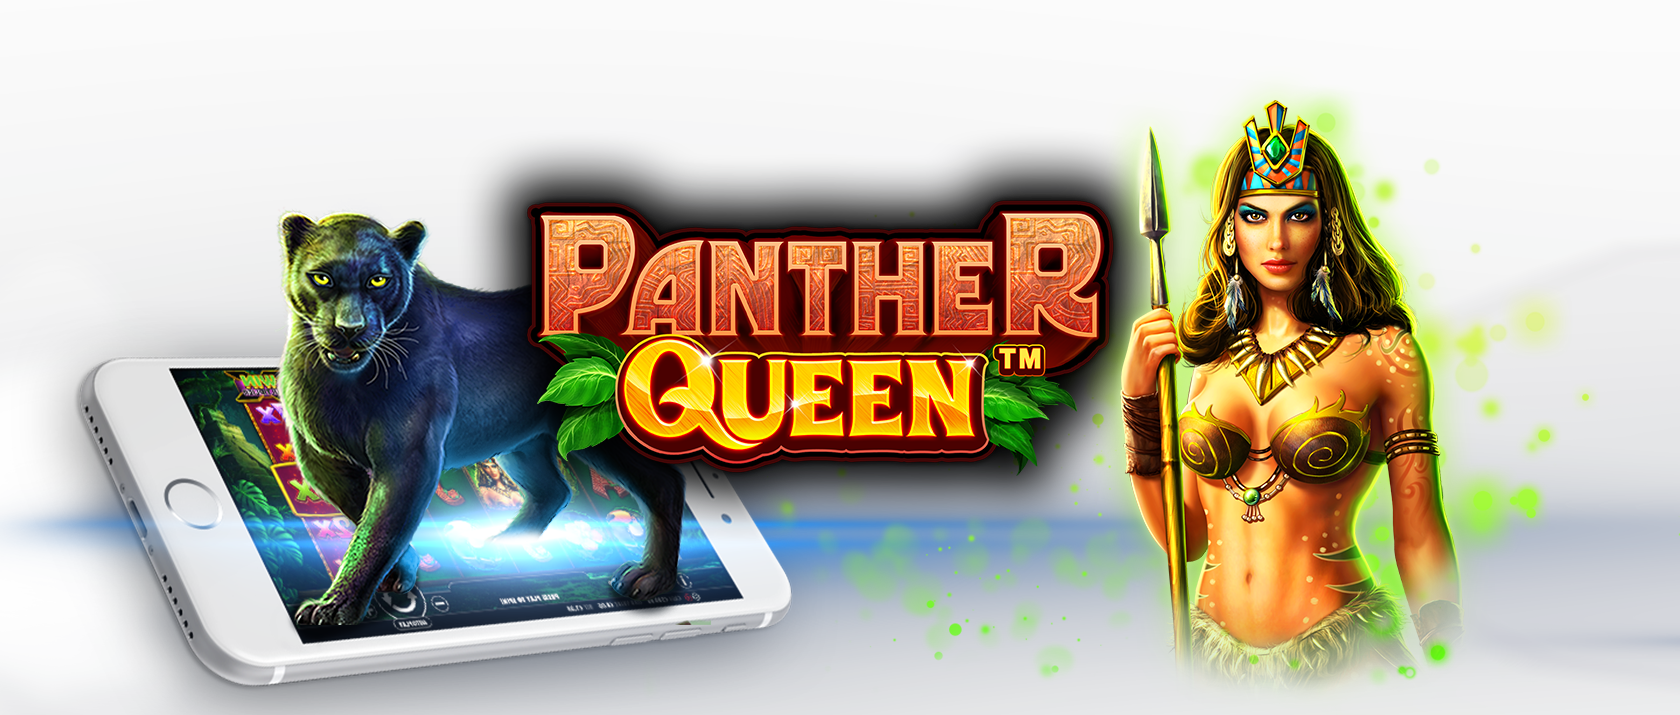 panther queen slots game logo